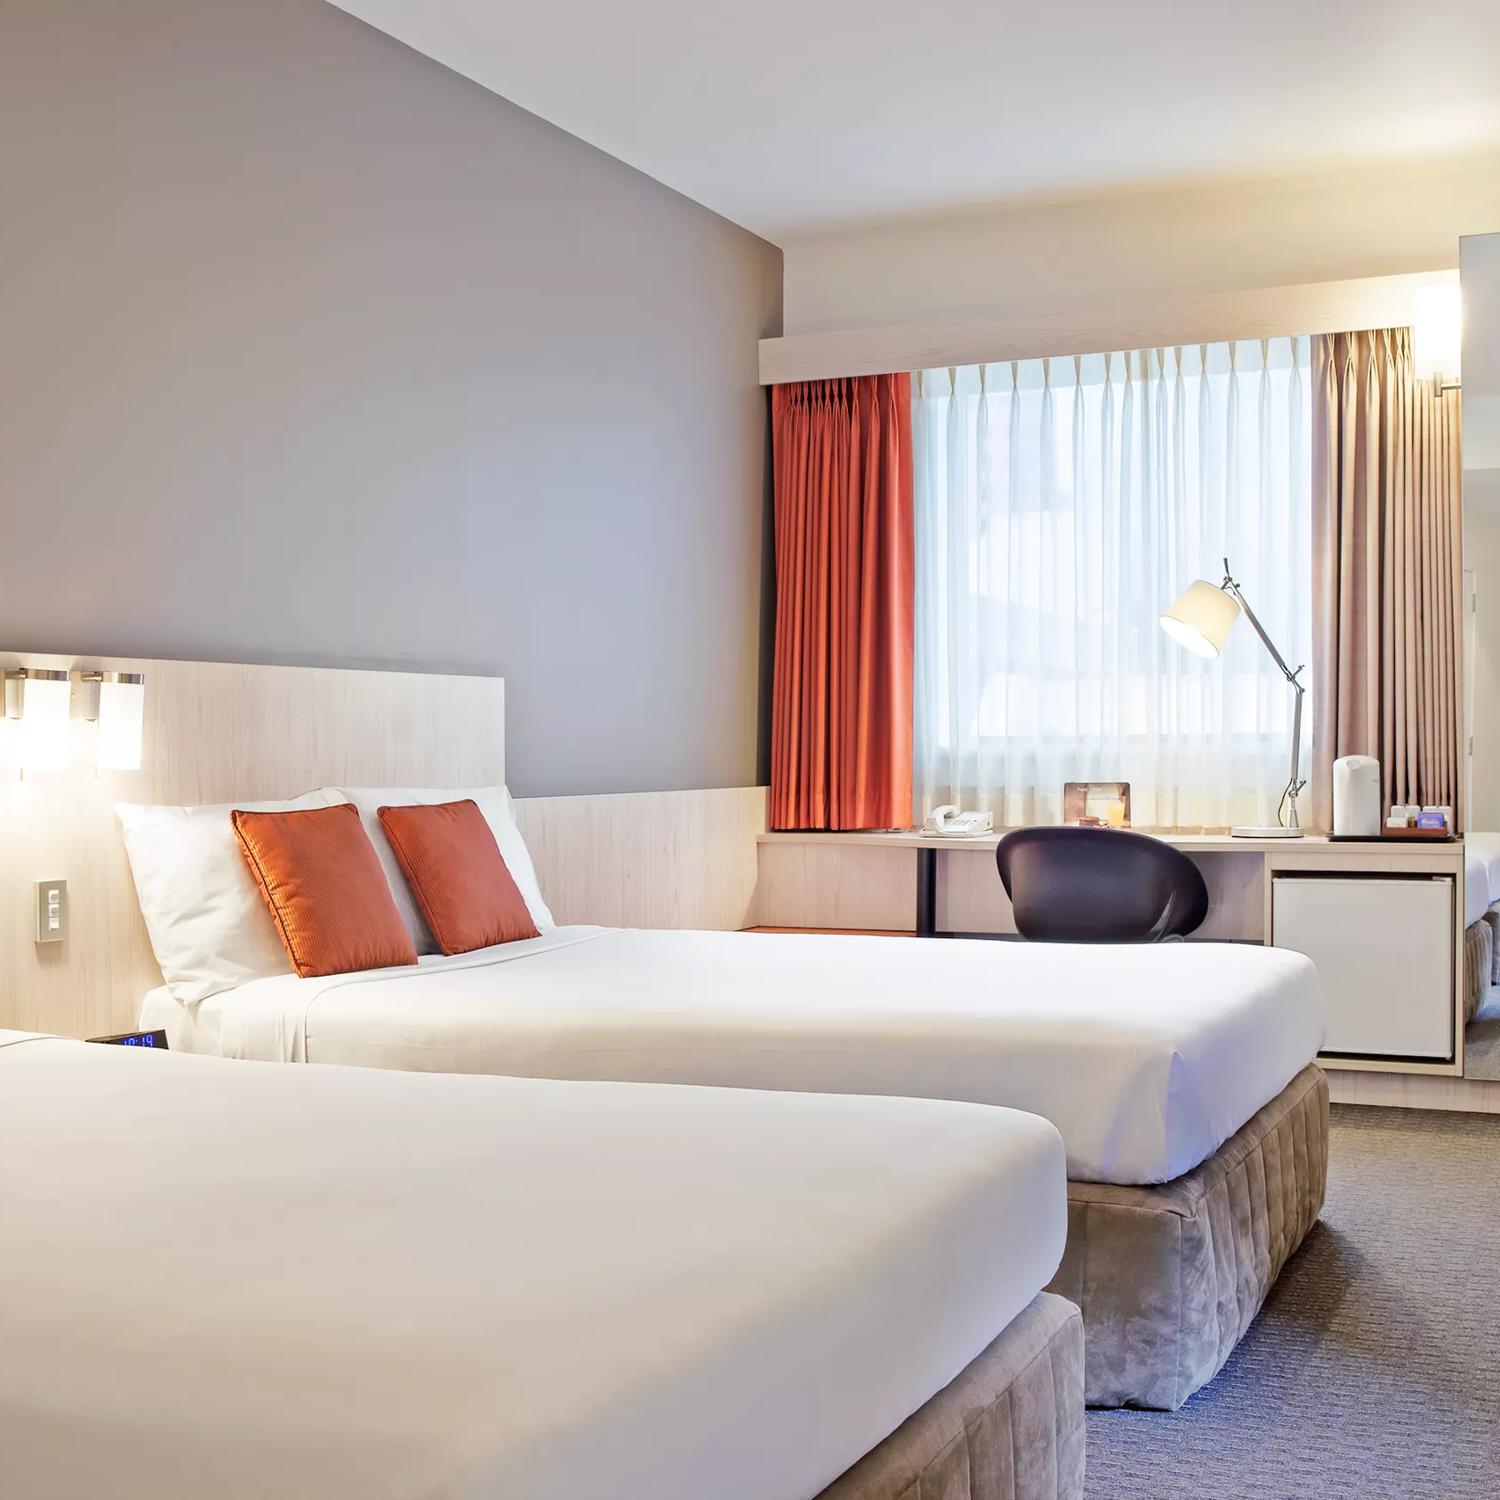 A room at the Ibis Wellington. It has two queen beds with perfectly smooth white bedding each with two orange pillows. A desk and chair sit against the window and a full-length mirror off to the side reflects the room.